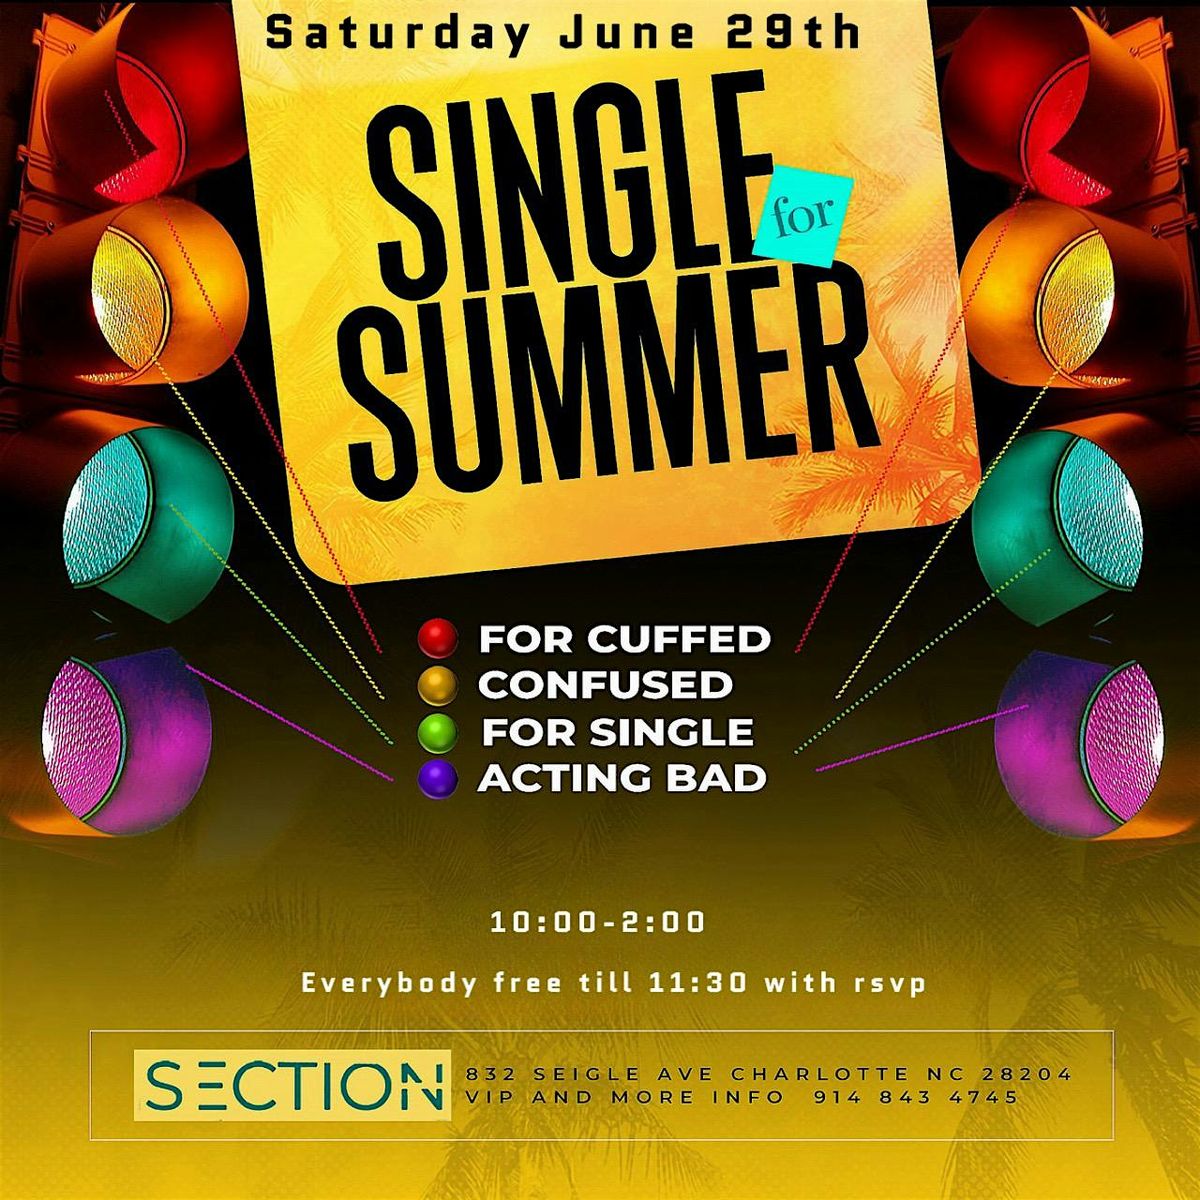 Single for the summer! Everybody free till 11:30 with RSVP